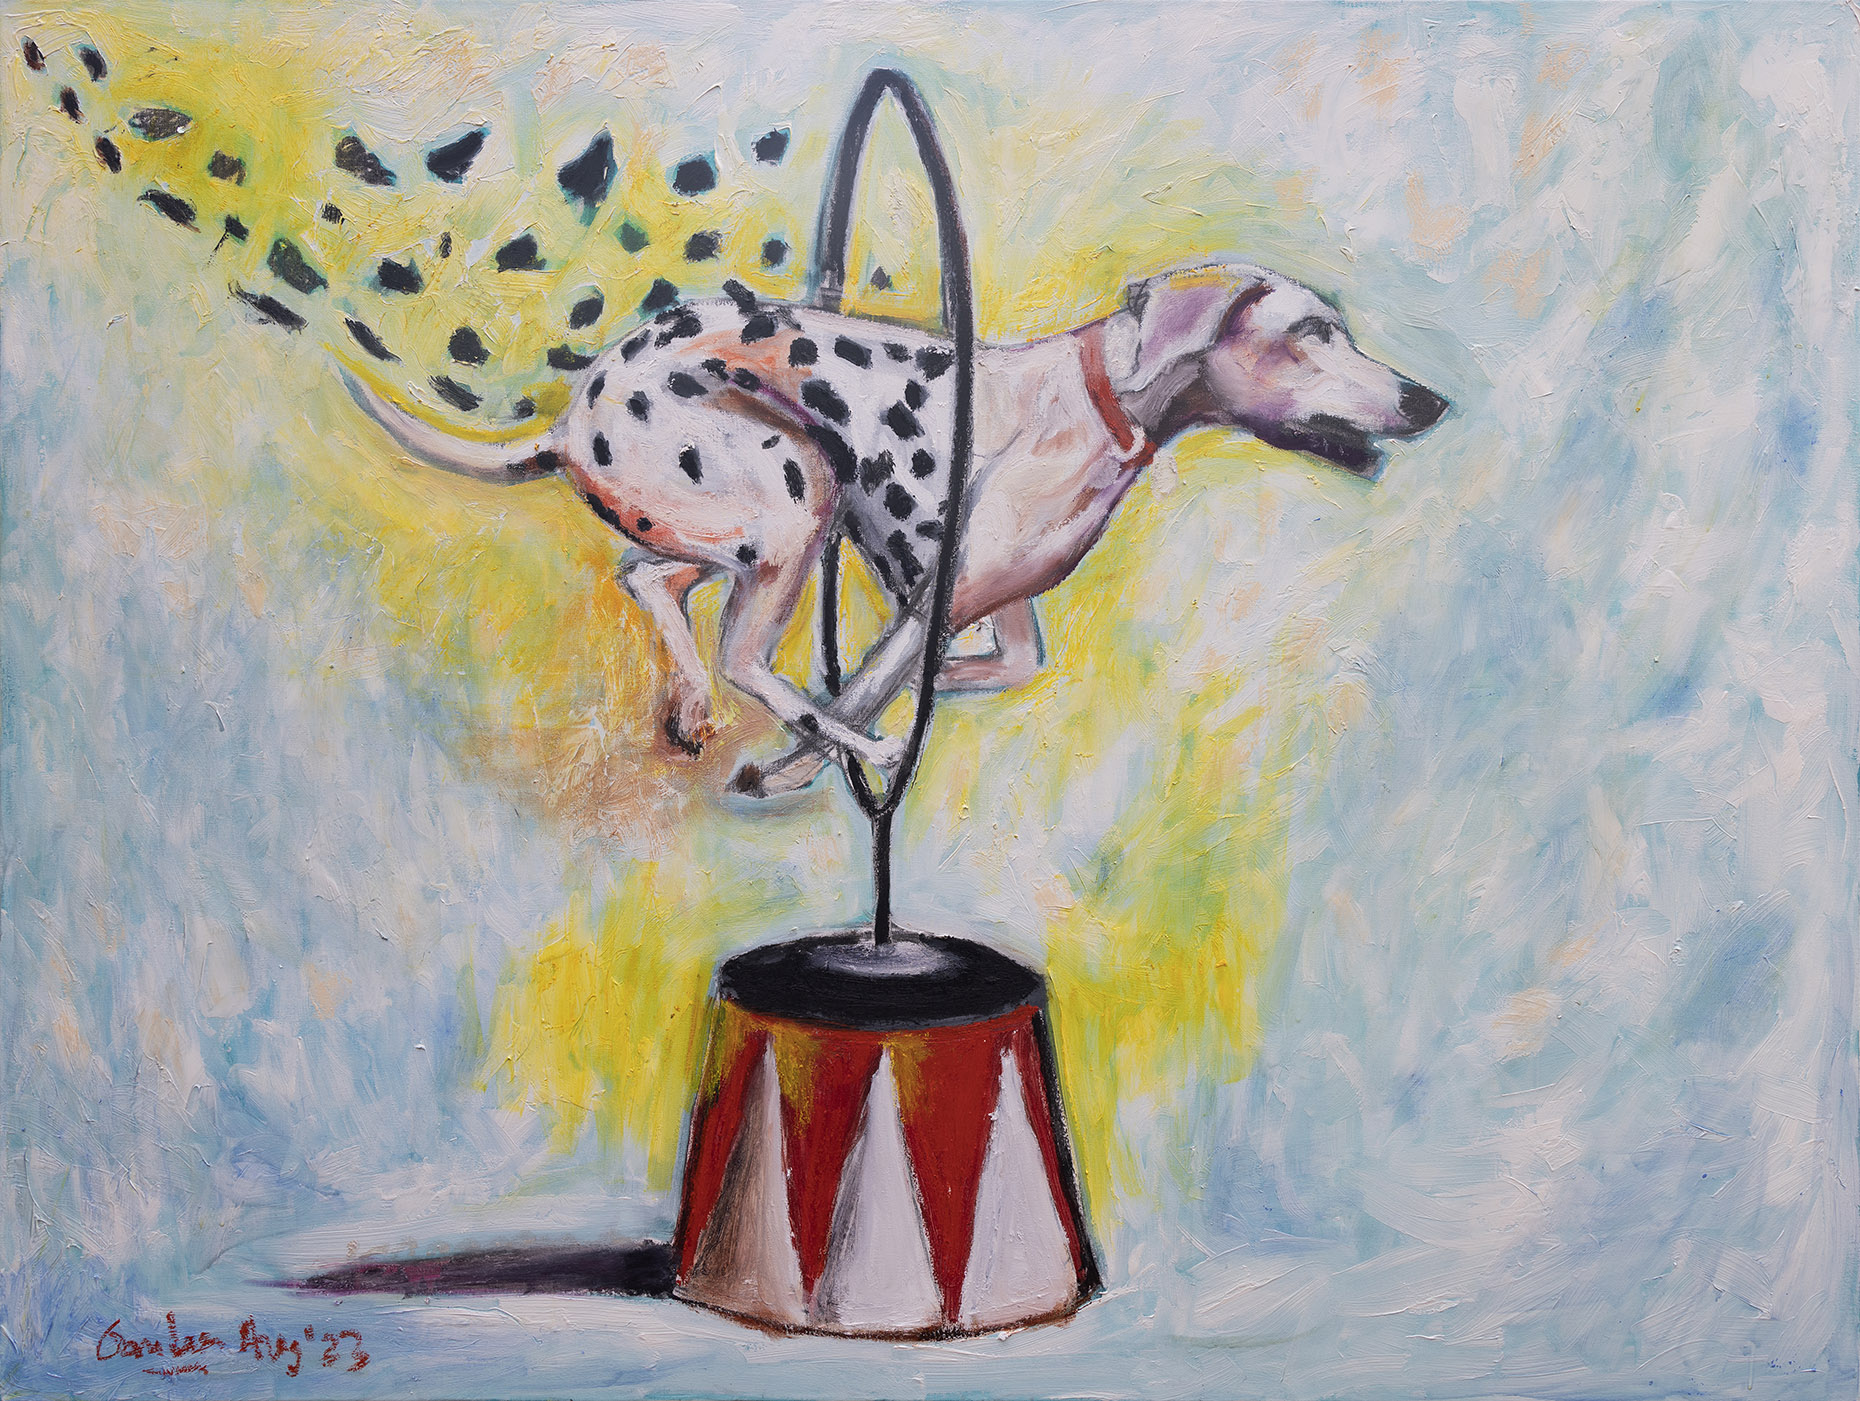 Spots Flying off Dalmatian Dog while it jumps through a circus hoop